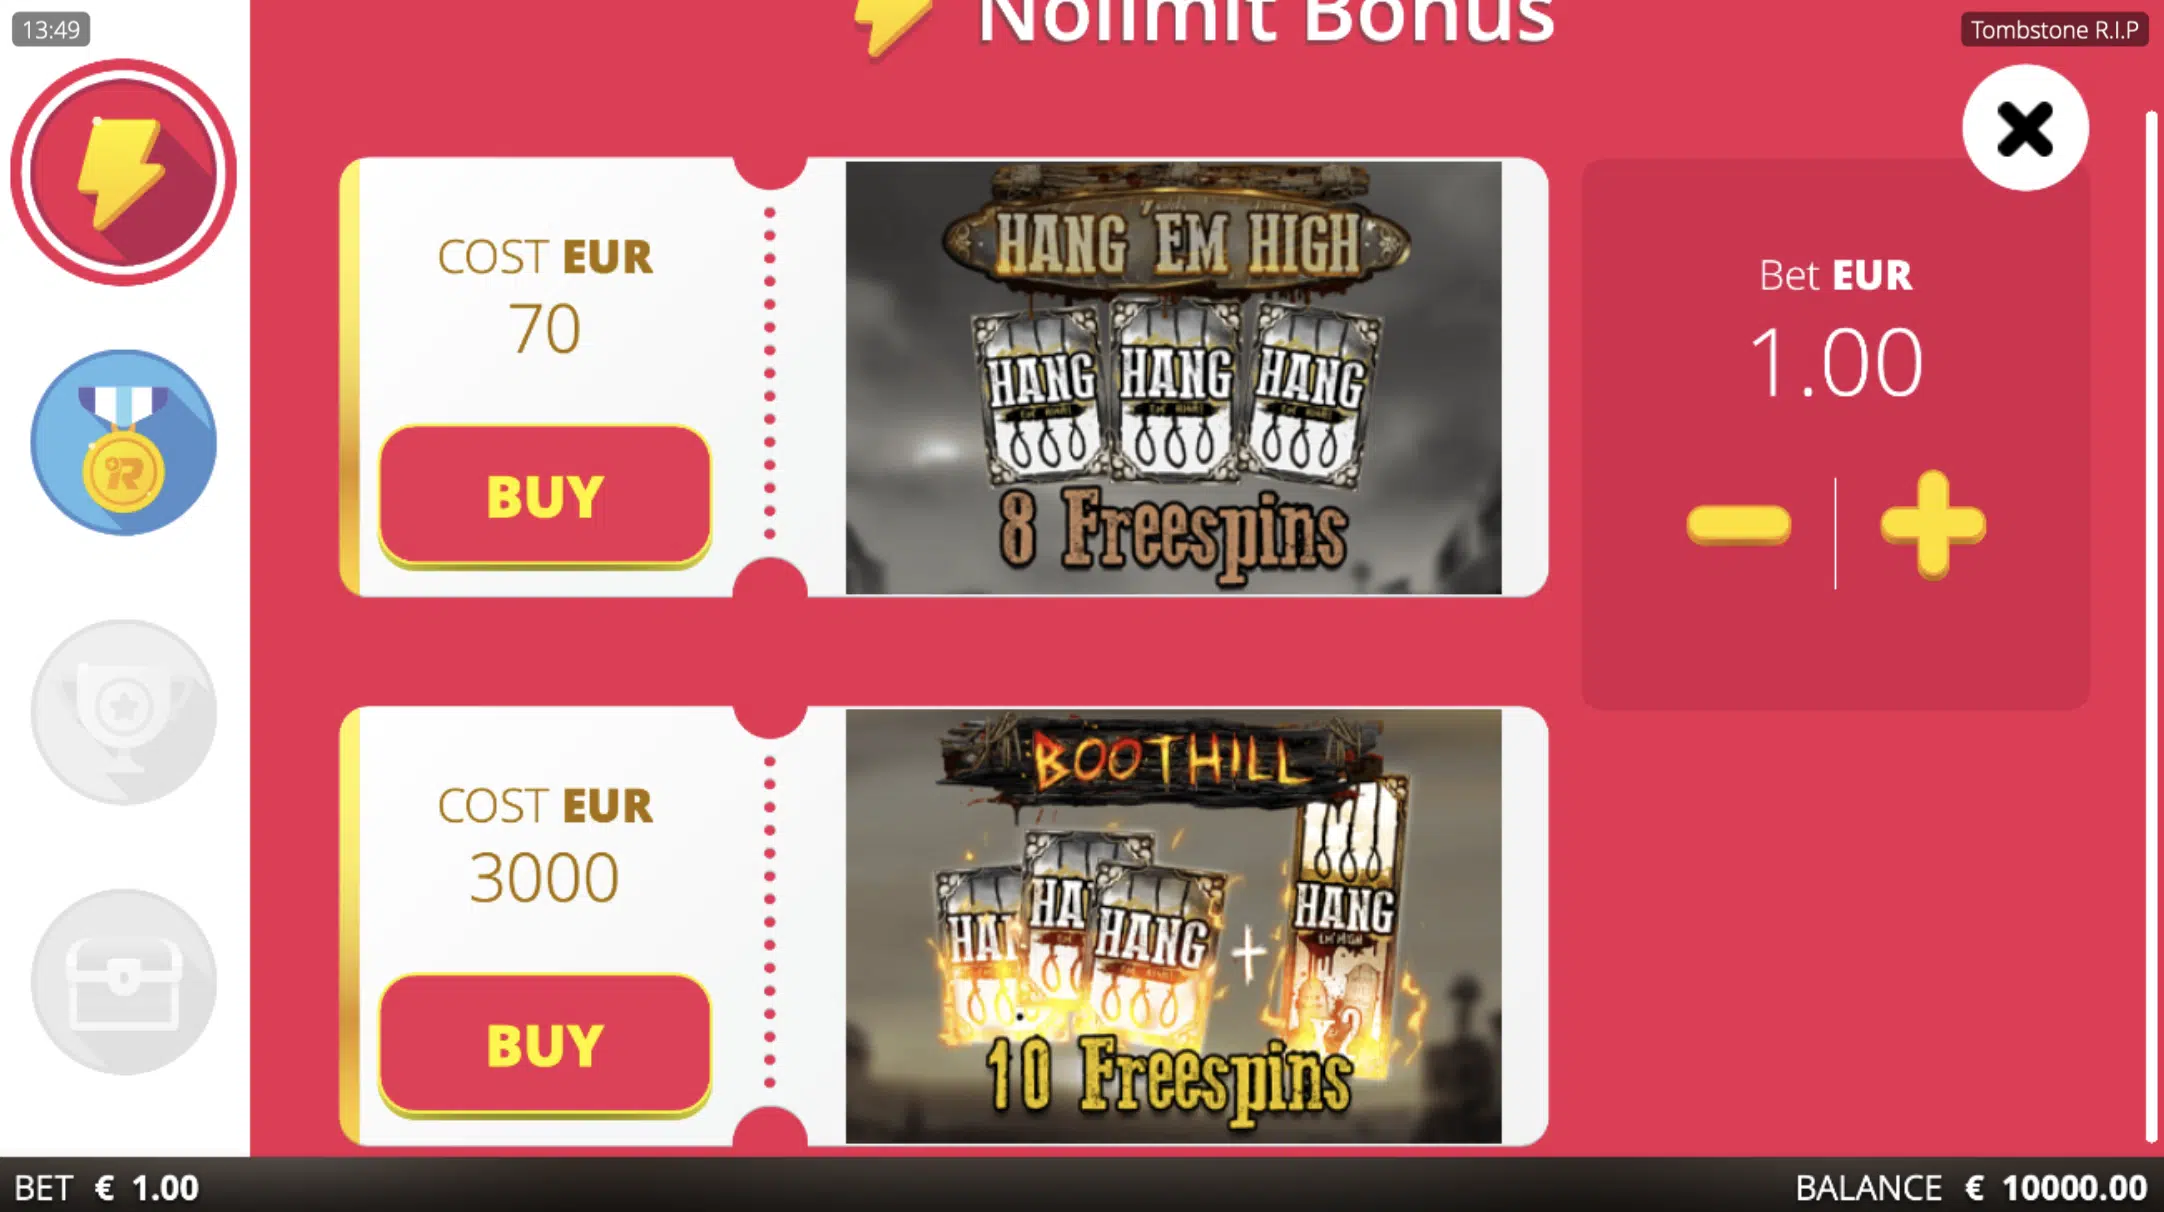 Tombstone RIP, by Nolimit City, Offers Players 2 Bonus Buy Options - 70x Bet and 3,000x Bet in Cost